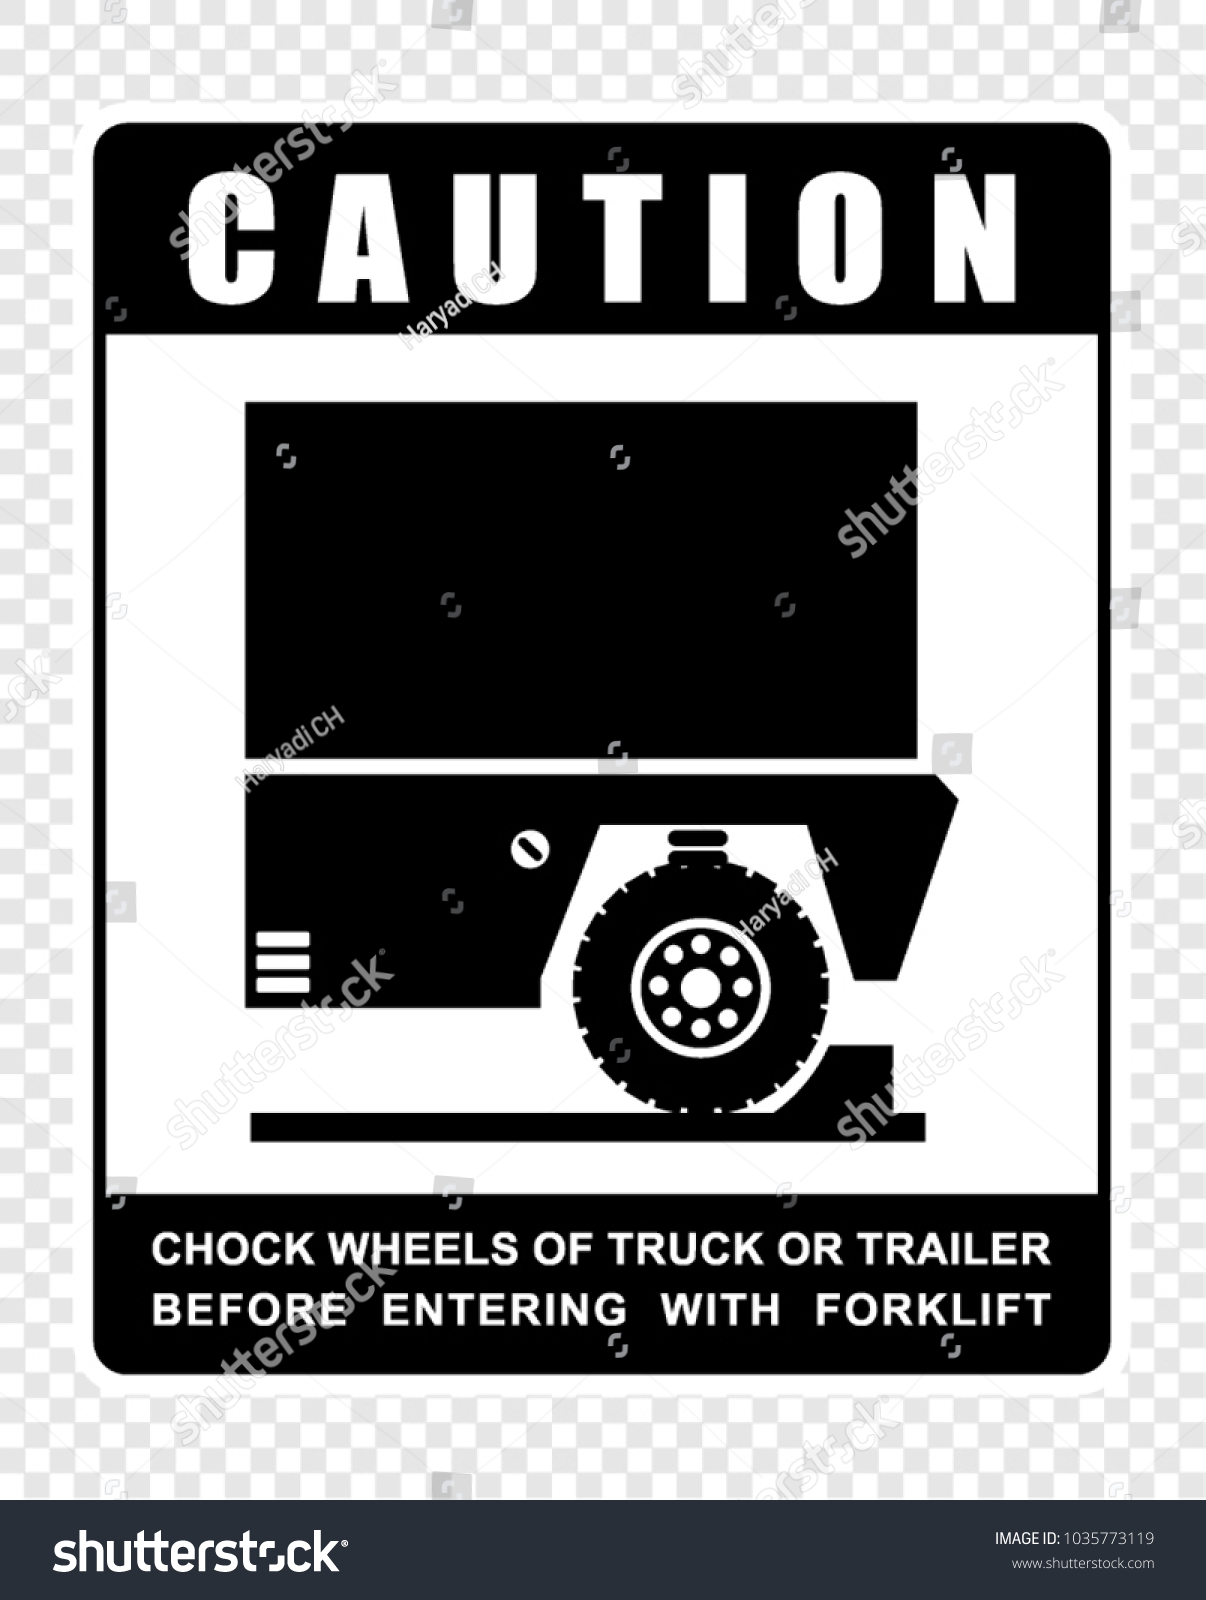 Caution Forklift Vector Stock Vector Royalty Free 1035773119